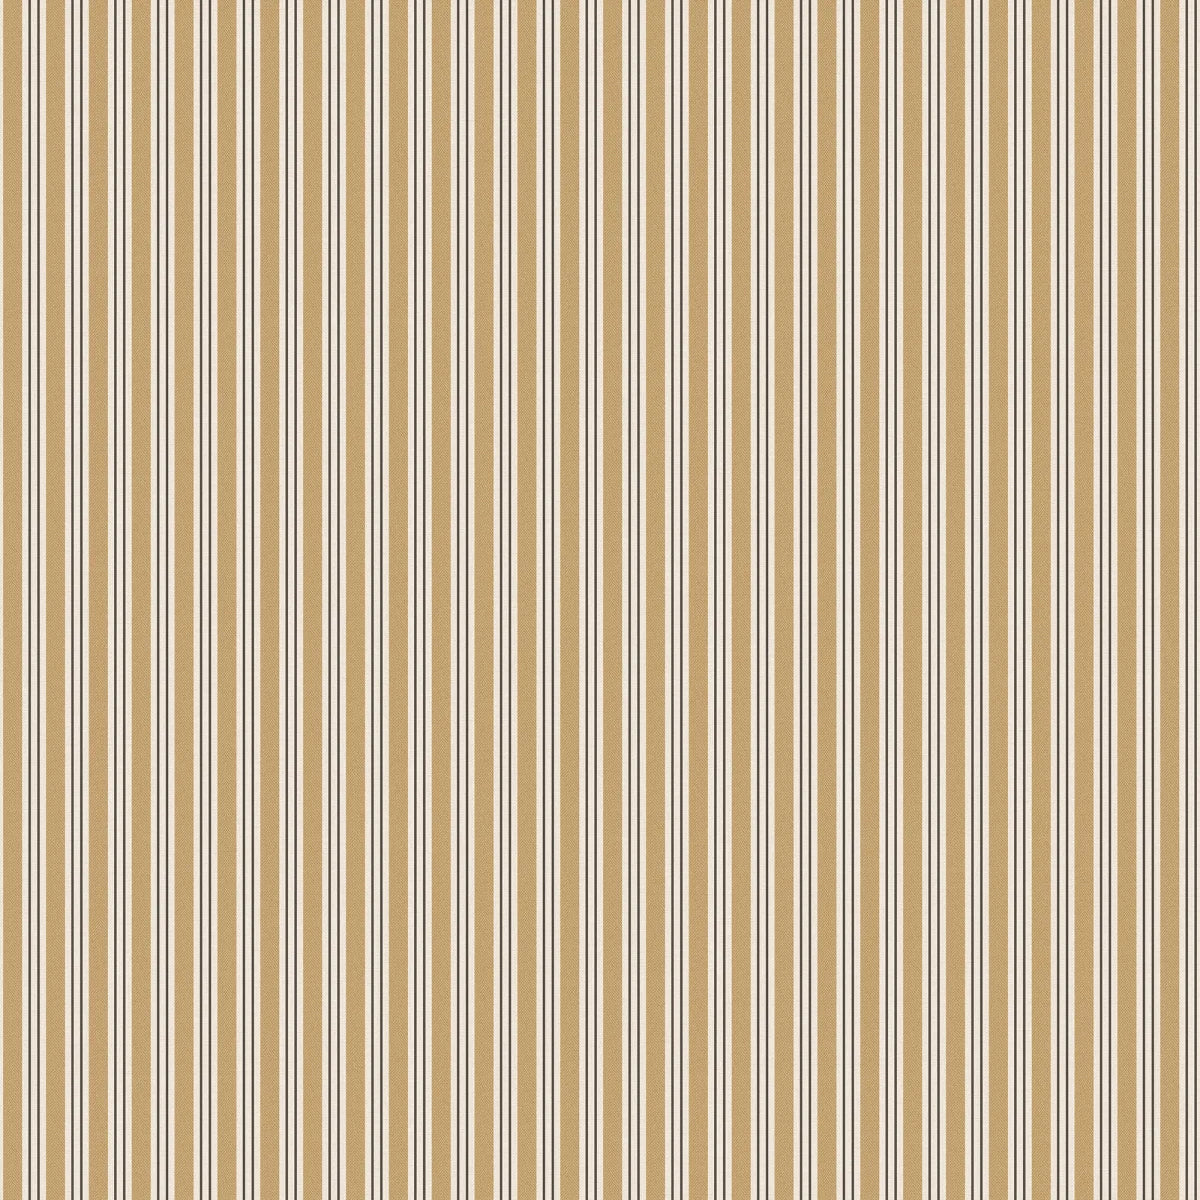 A cool striped wallpaper with a soft textile character in exclusive colors that dress the walls both luxuriously and stylishly. 